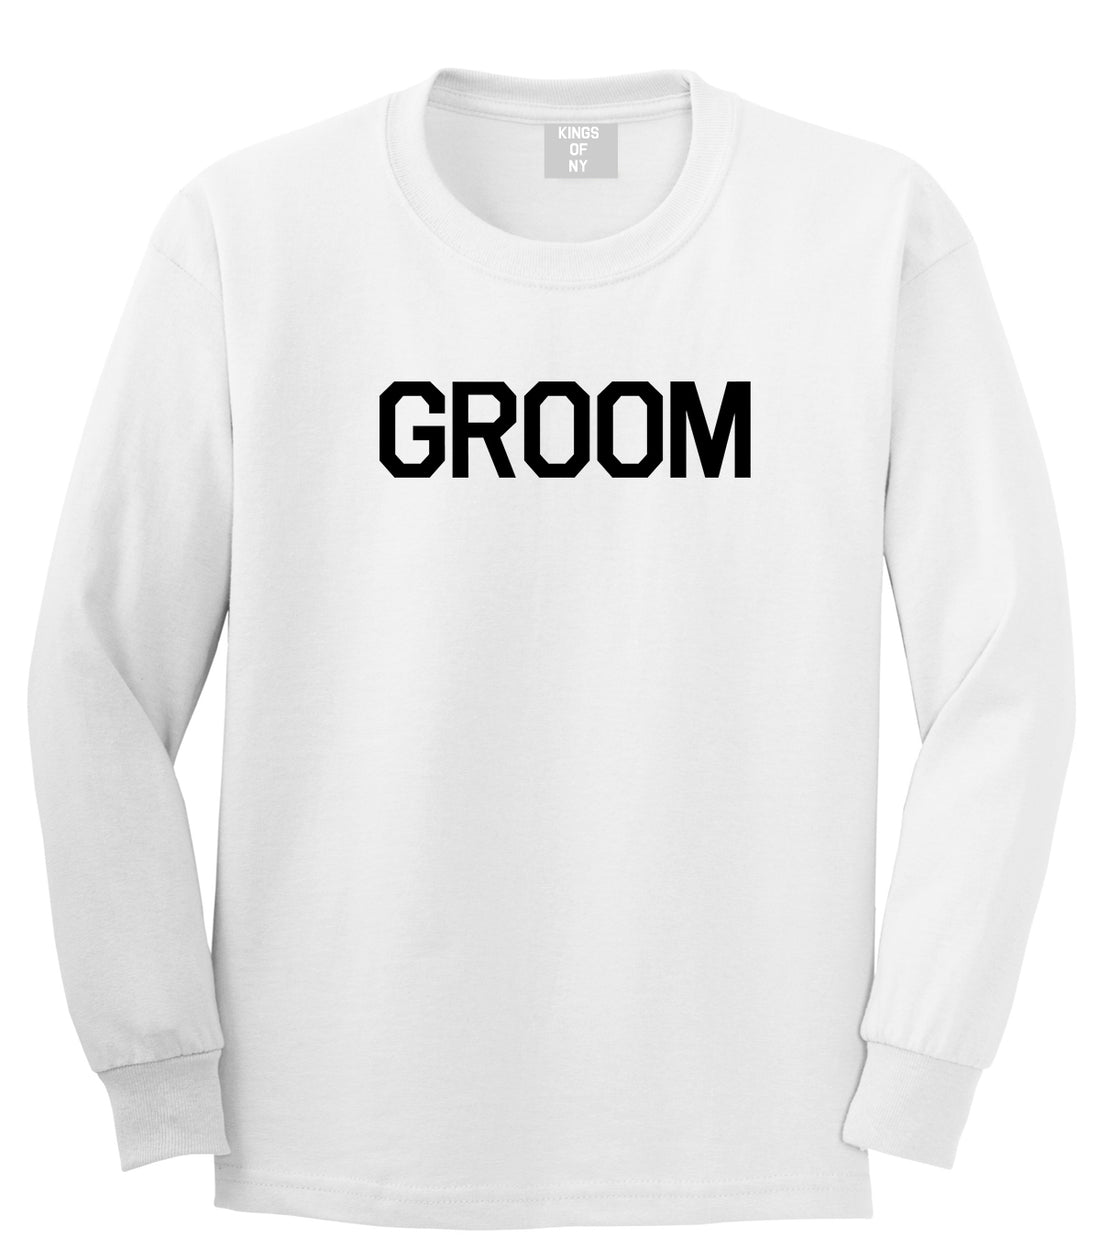 The Groom Bachelor Party White Long Sleeve T-Shirt by Kings Of NY